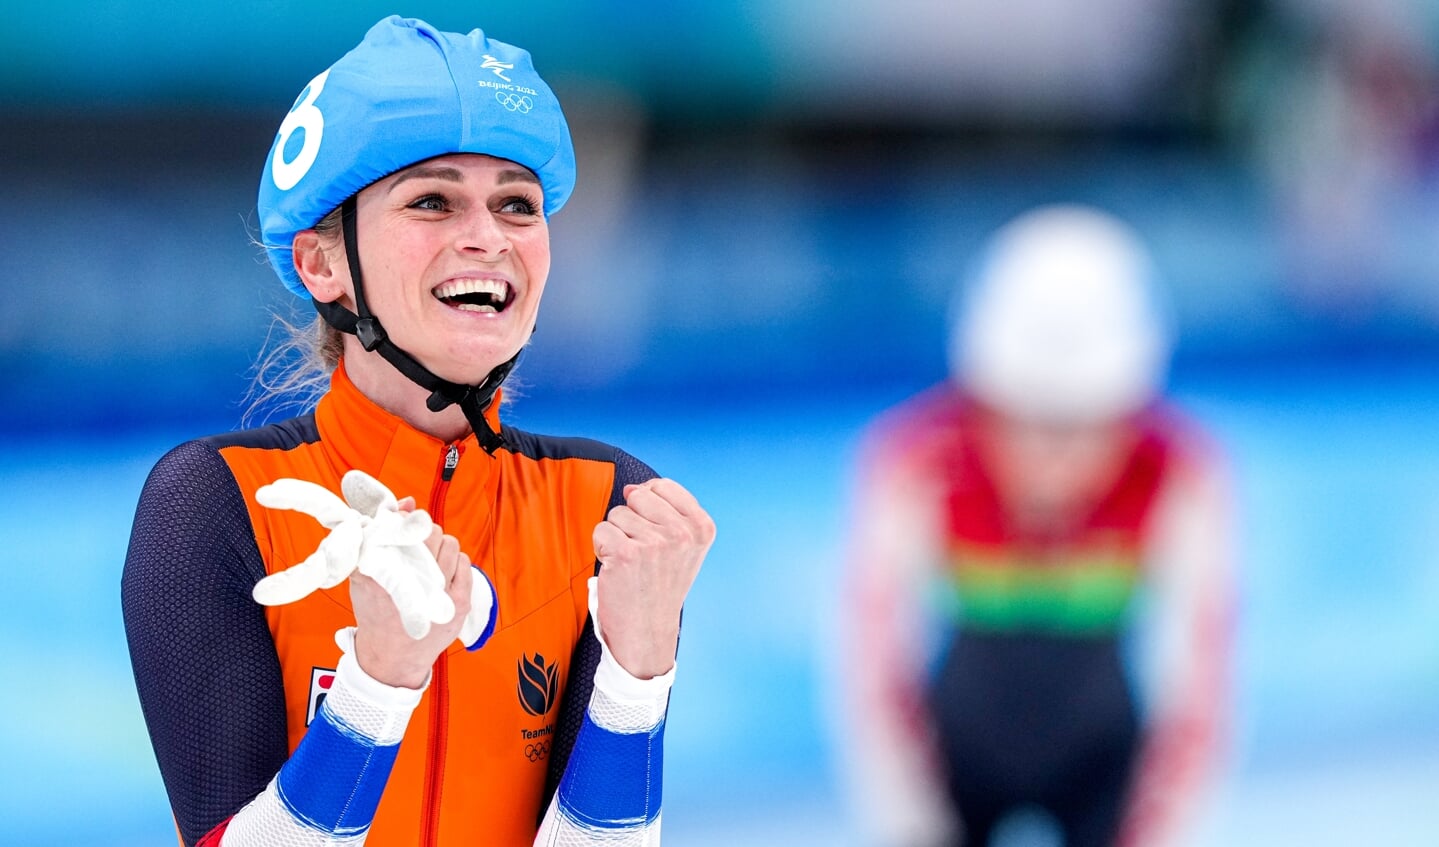 BEIJING, CHINA - FEBRUARY 19: Irene Schouten of the Netherlands celebrating first place competing on the Women's Mass Start Final during the Beijing 2022 Olympic Games at the National Speed Skating Oval on February 19, 2022 in Beijing, China (Photo by Douwe Bijlsma/Orange Pictures) NOCNSF